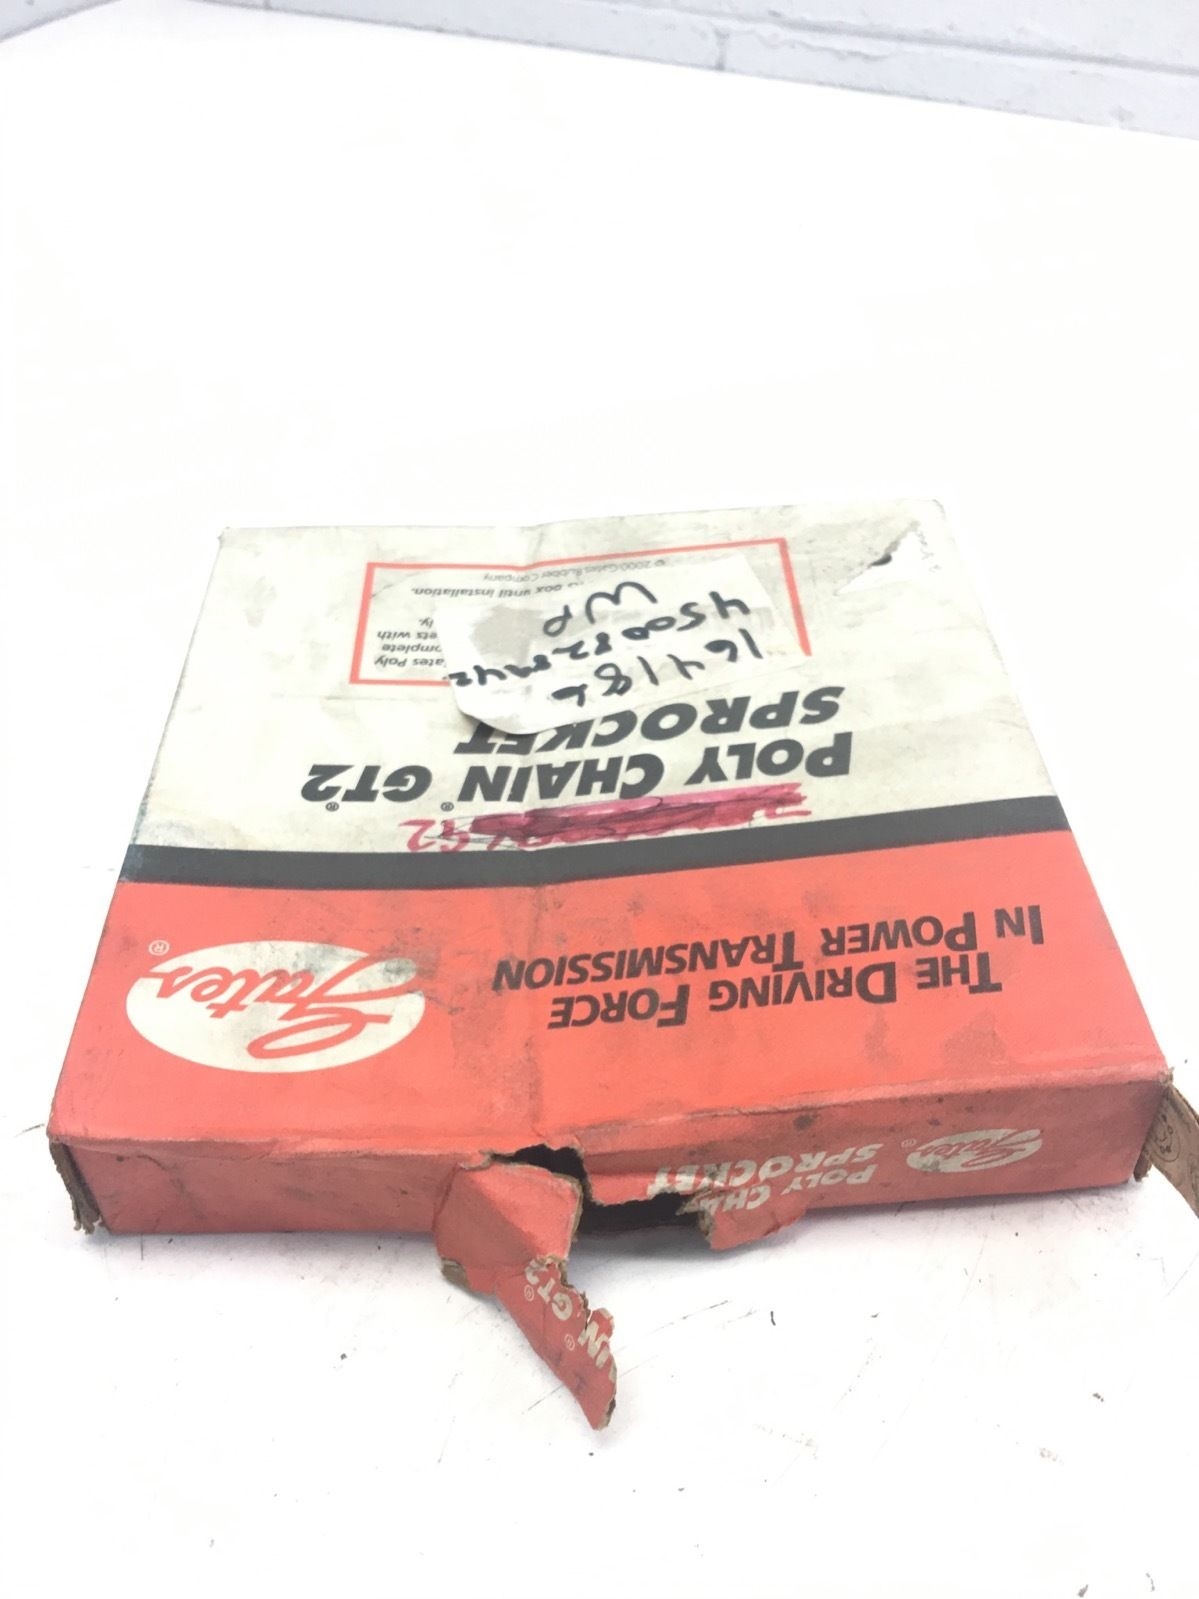 NEW IN BOX GATES TIMING SPROCKET, 8MX-90S-12 2012, POLY CHAIN GT2, (B275) 2